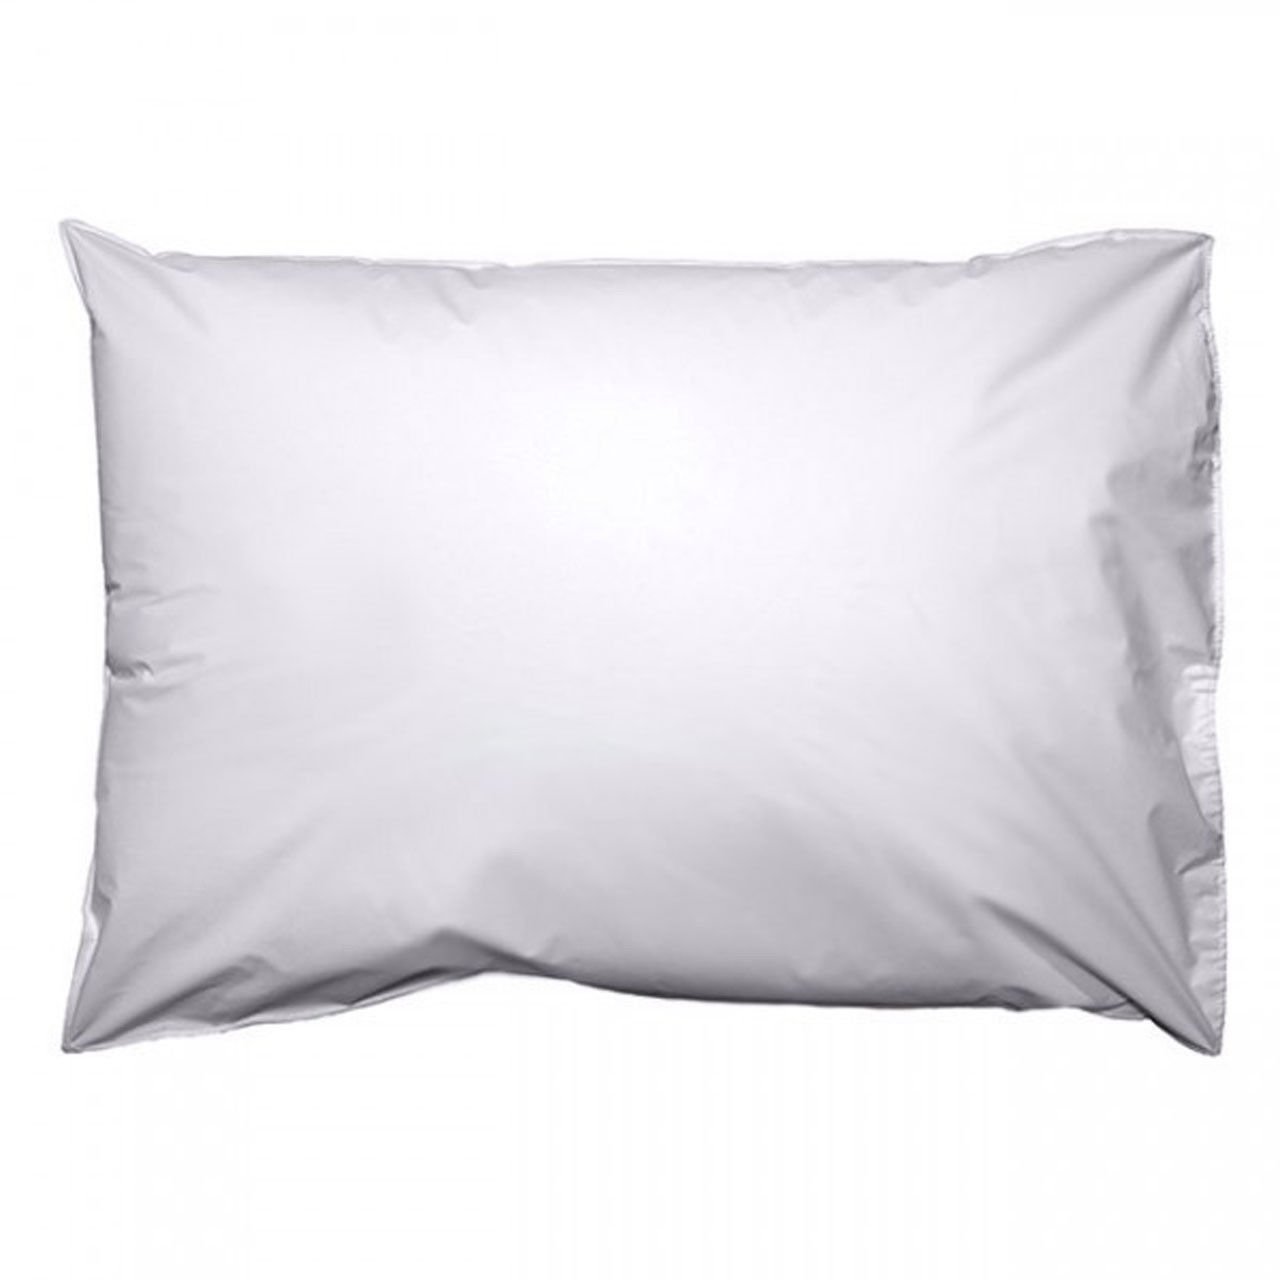 What color variants are offered for the Standard Wipeable Pillows?